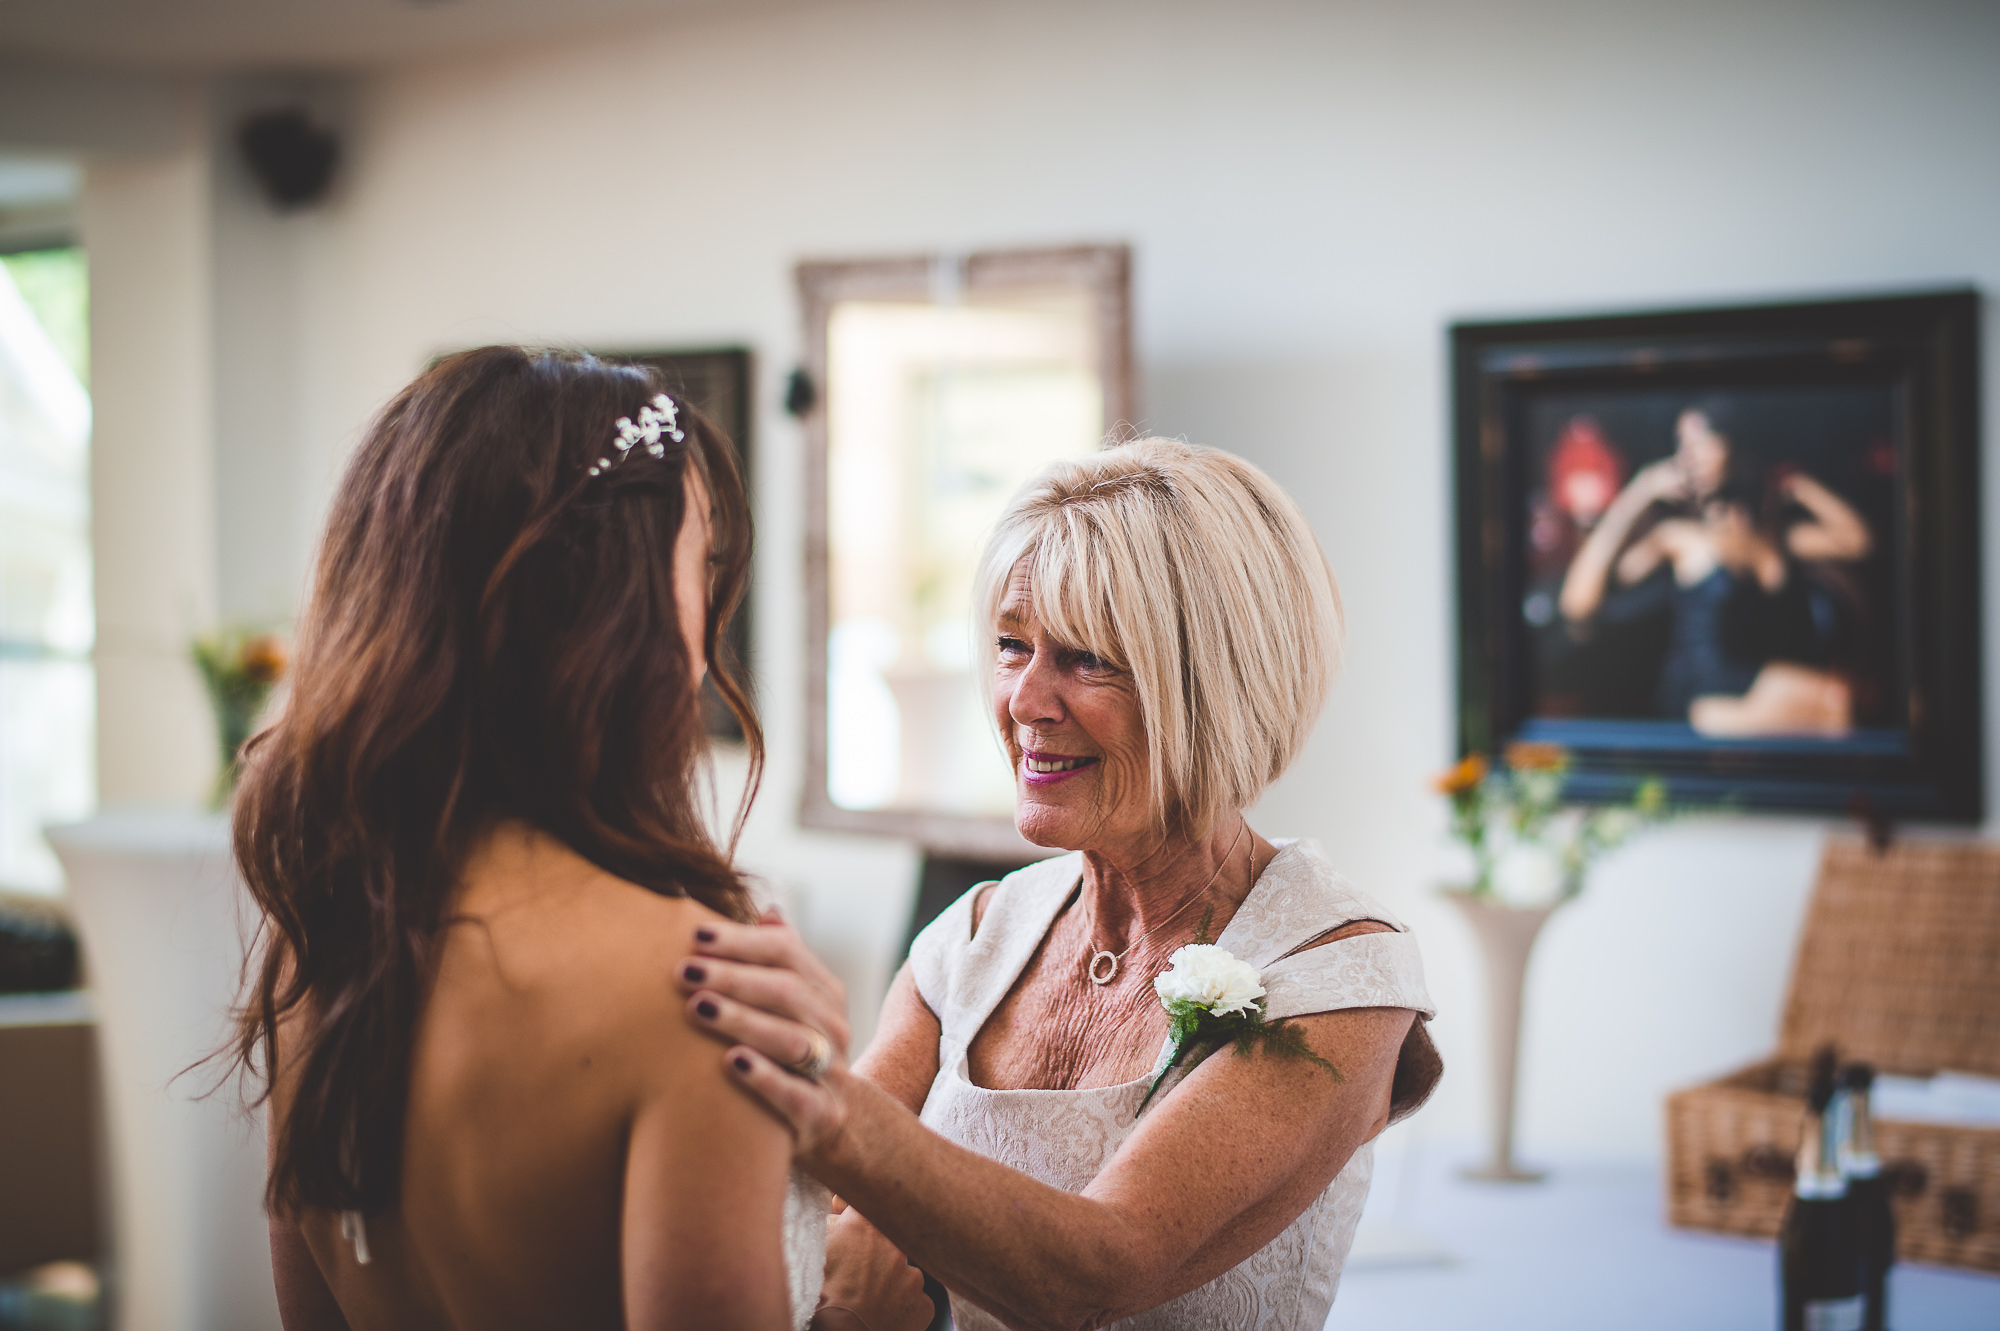 A woman is assisting her mother in getting ready for her big day as the bride.